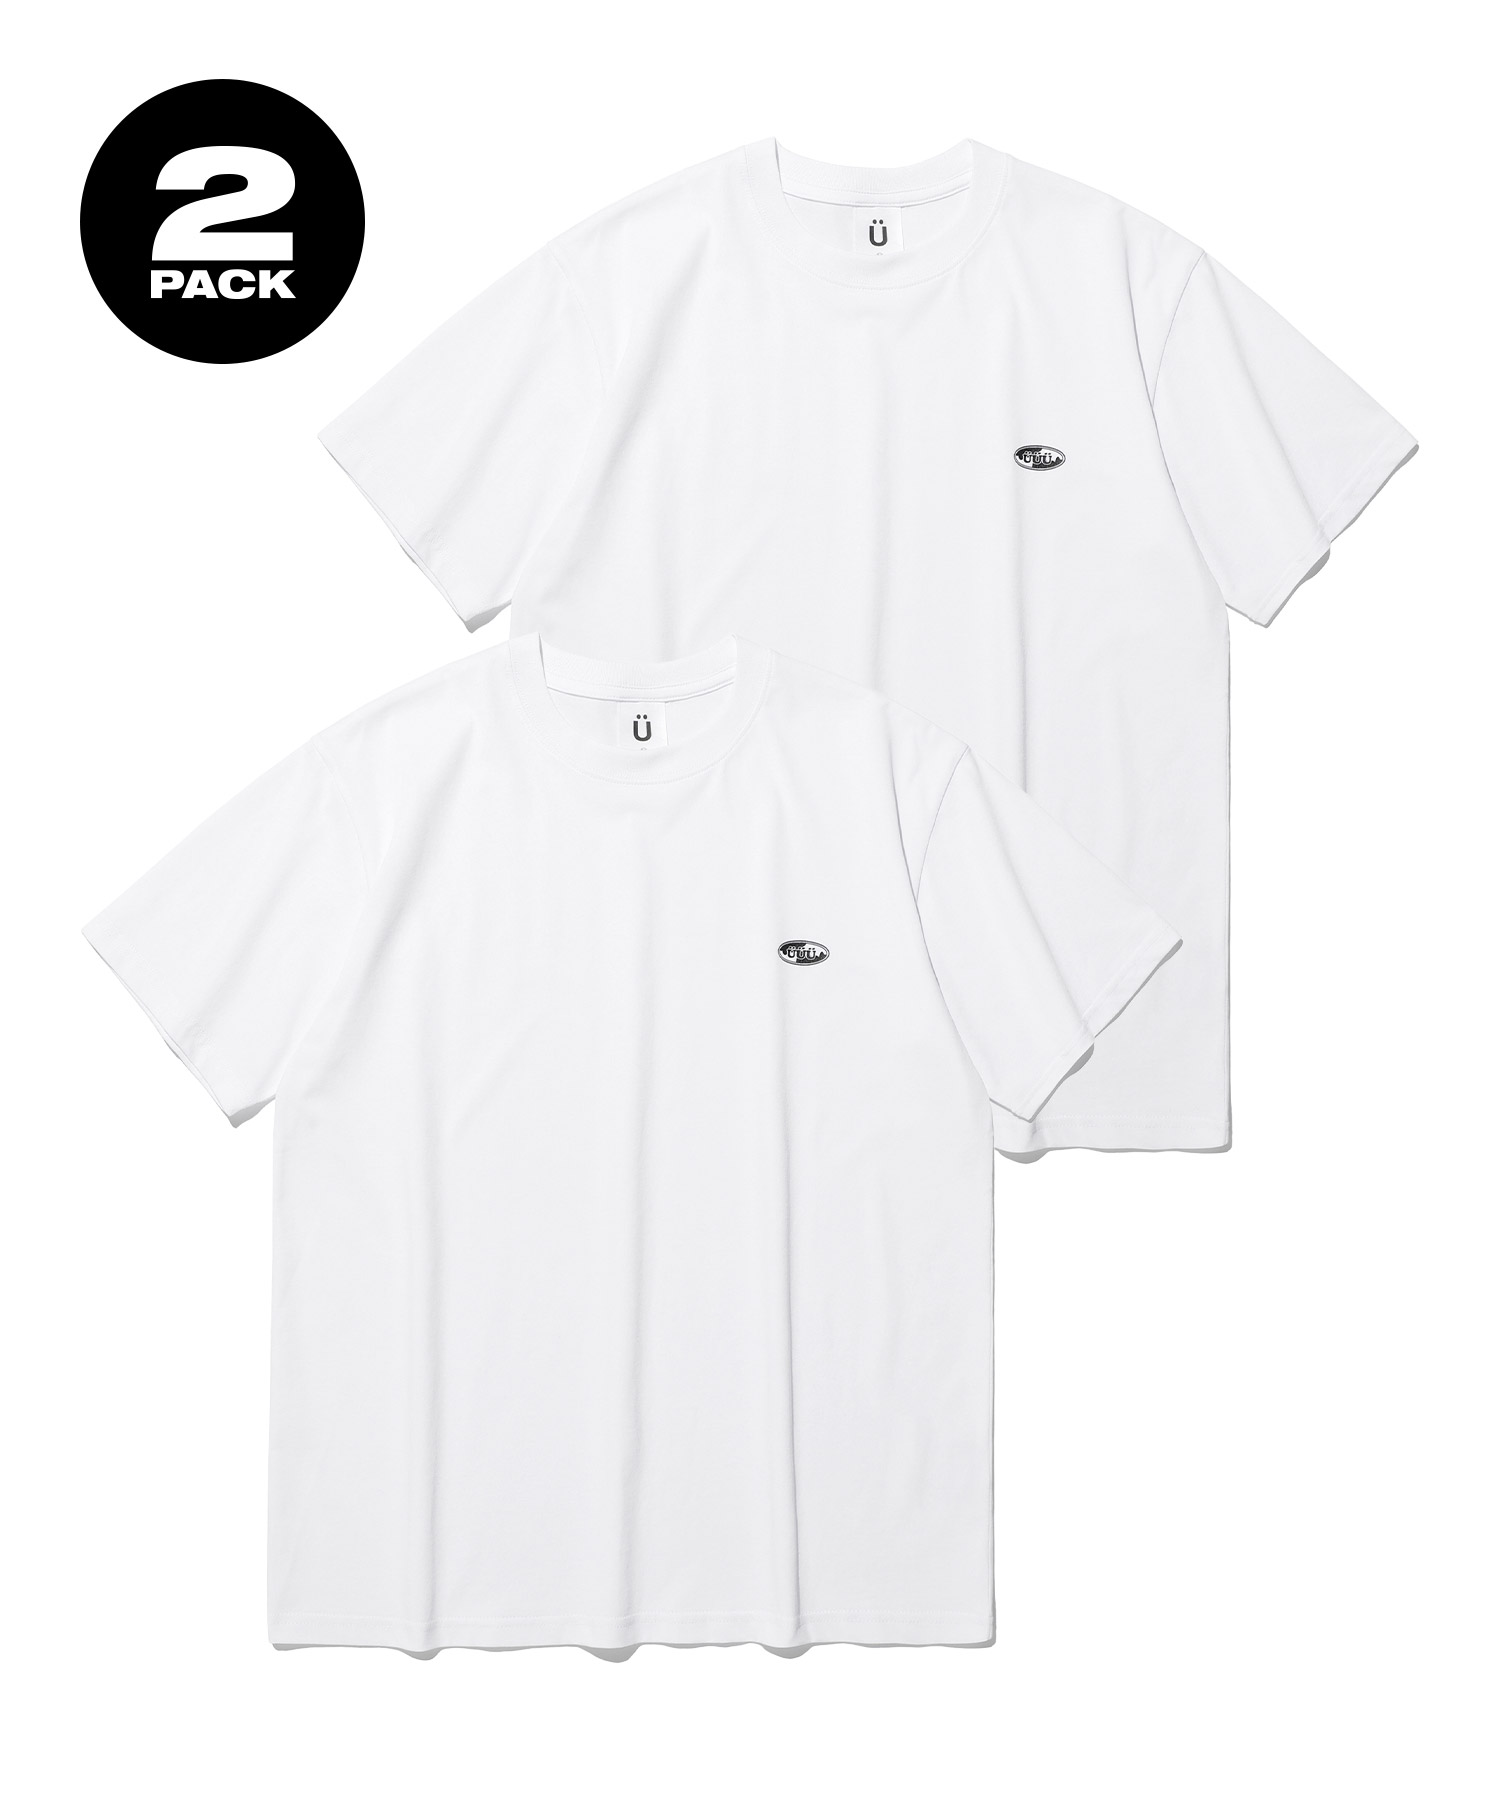 2PACK COOL TEE[WHITE]